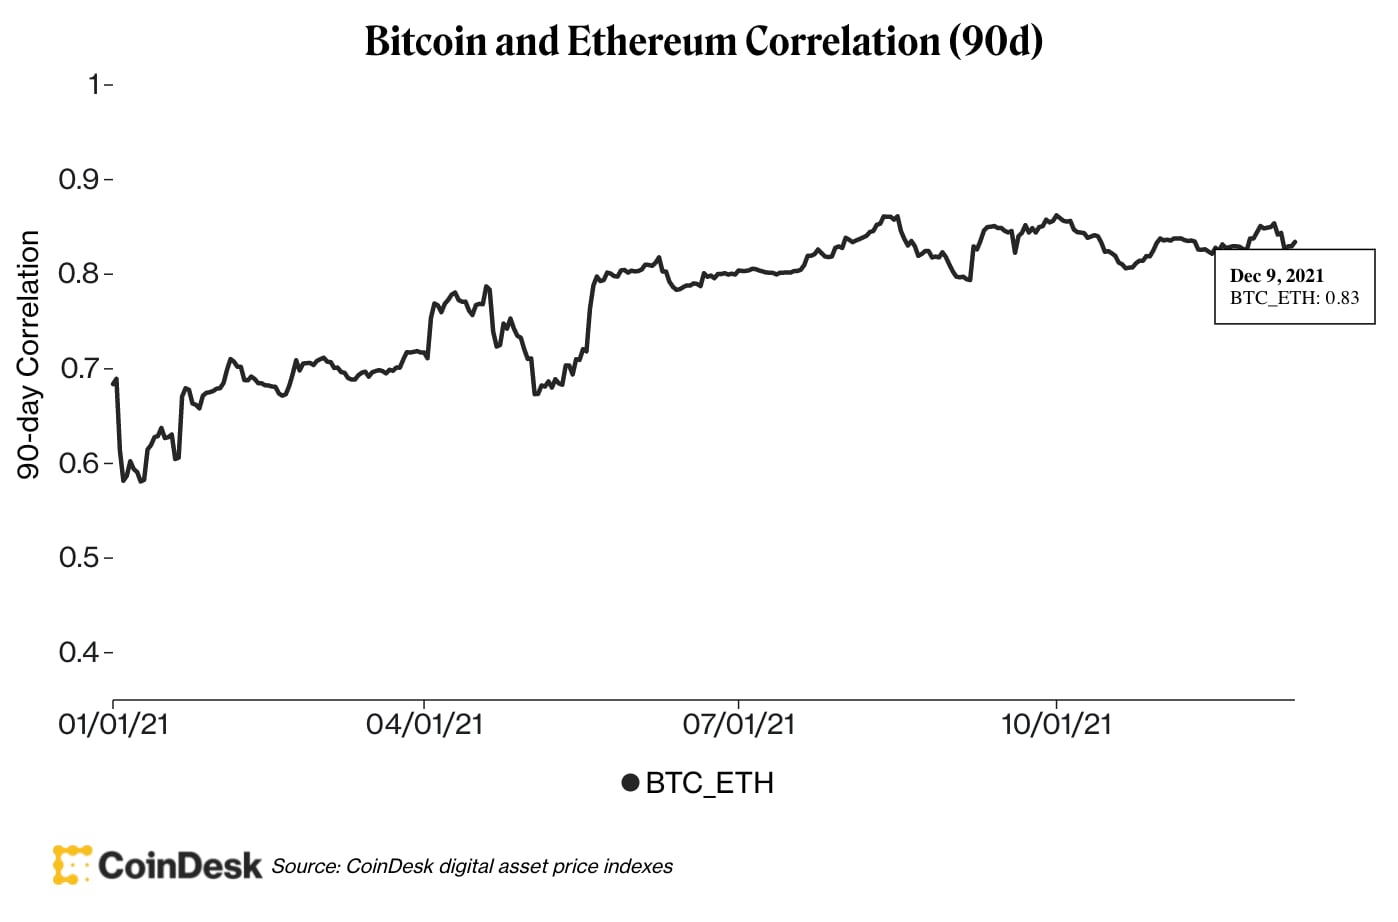 Bitcoin and ether correlations, 90-day, since Jan. 1, 2021.